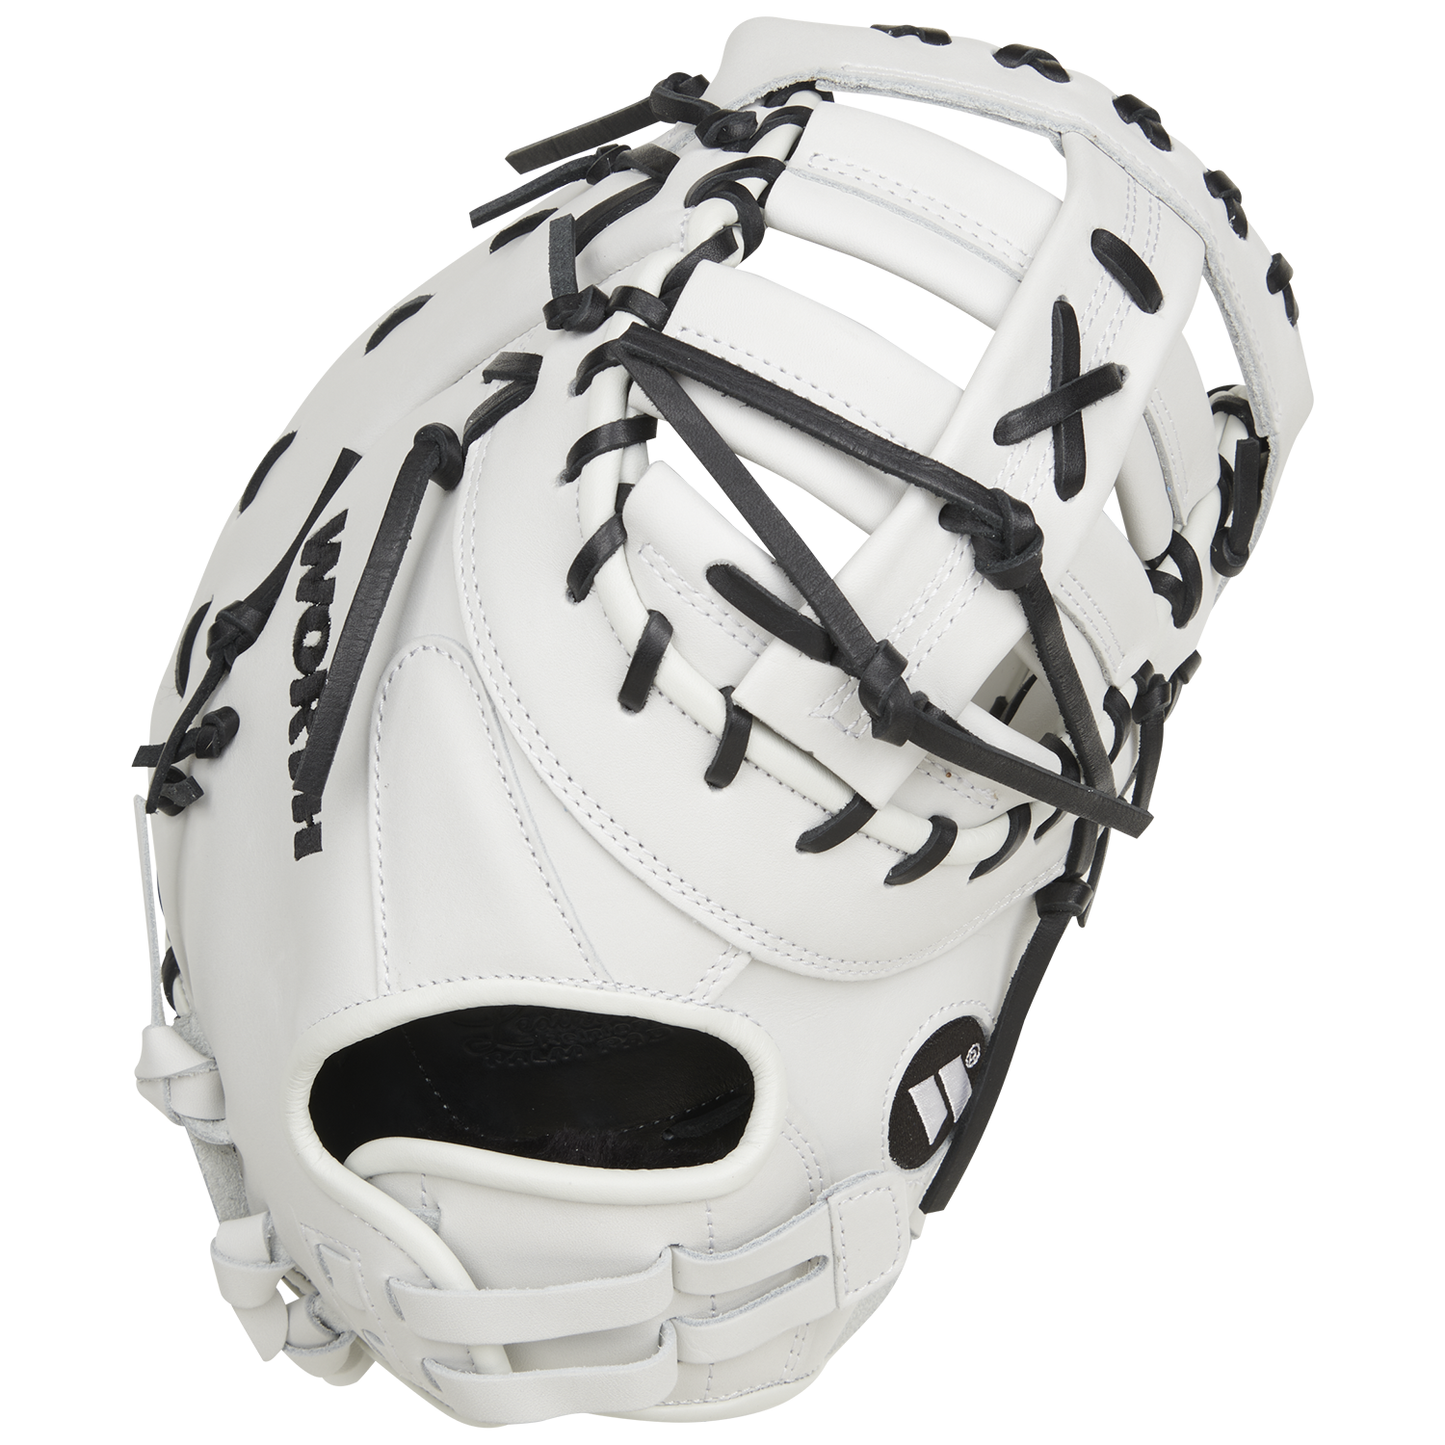 Worth Freedom Series 13" Slowpitch First Base Fielding Glove - WWFDCT